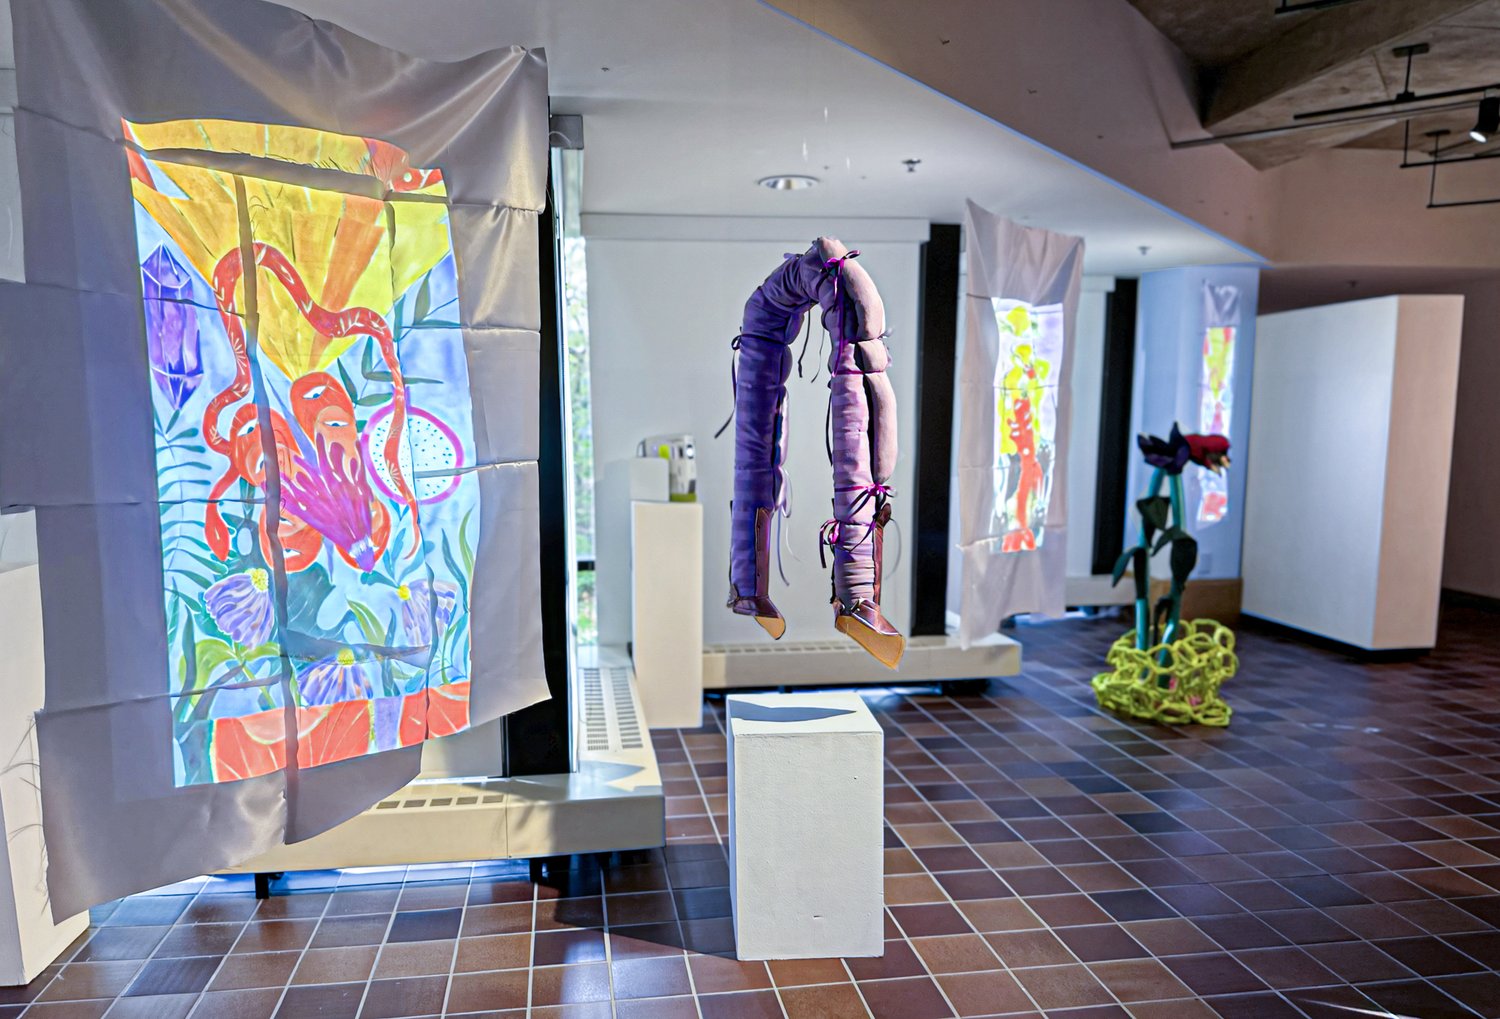 Installation image of art by Ivonne Yañez. Along a diagonal wall, moving image is projected onto fabric tapestries, alongside hanging soft sculptures in shiny purple silk.